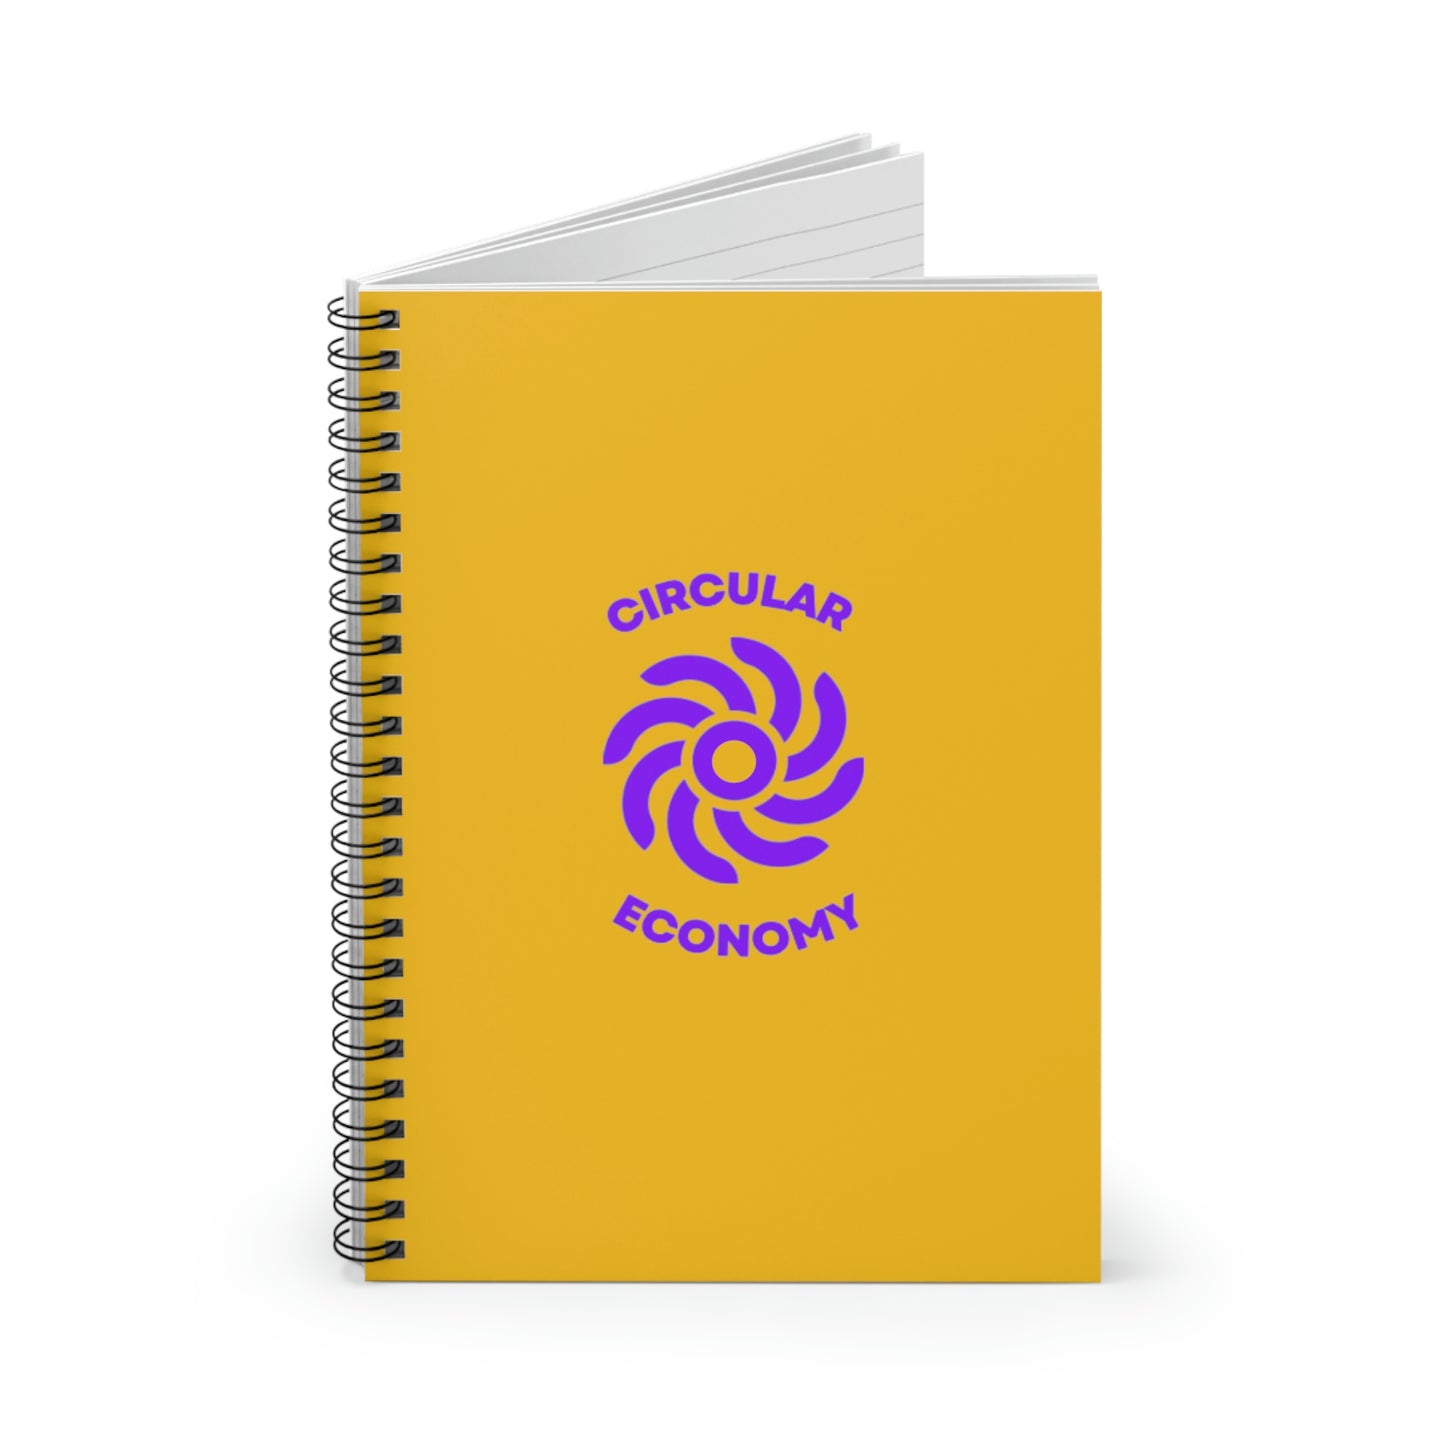 CIRCULAR ECONOMY - Spiral Notebook - Ruled Line - Yellow Cover